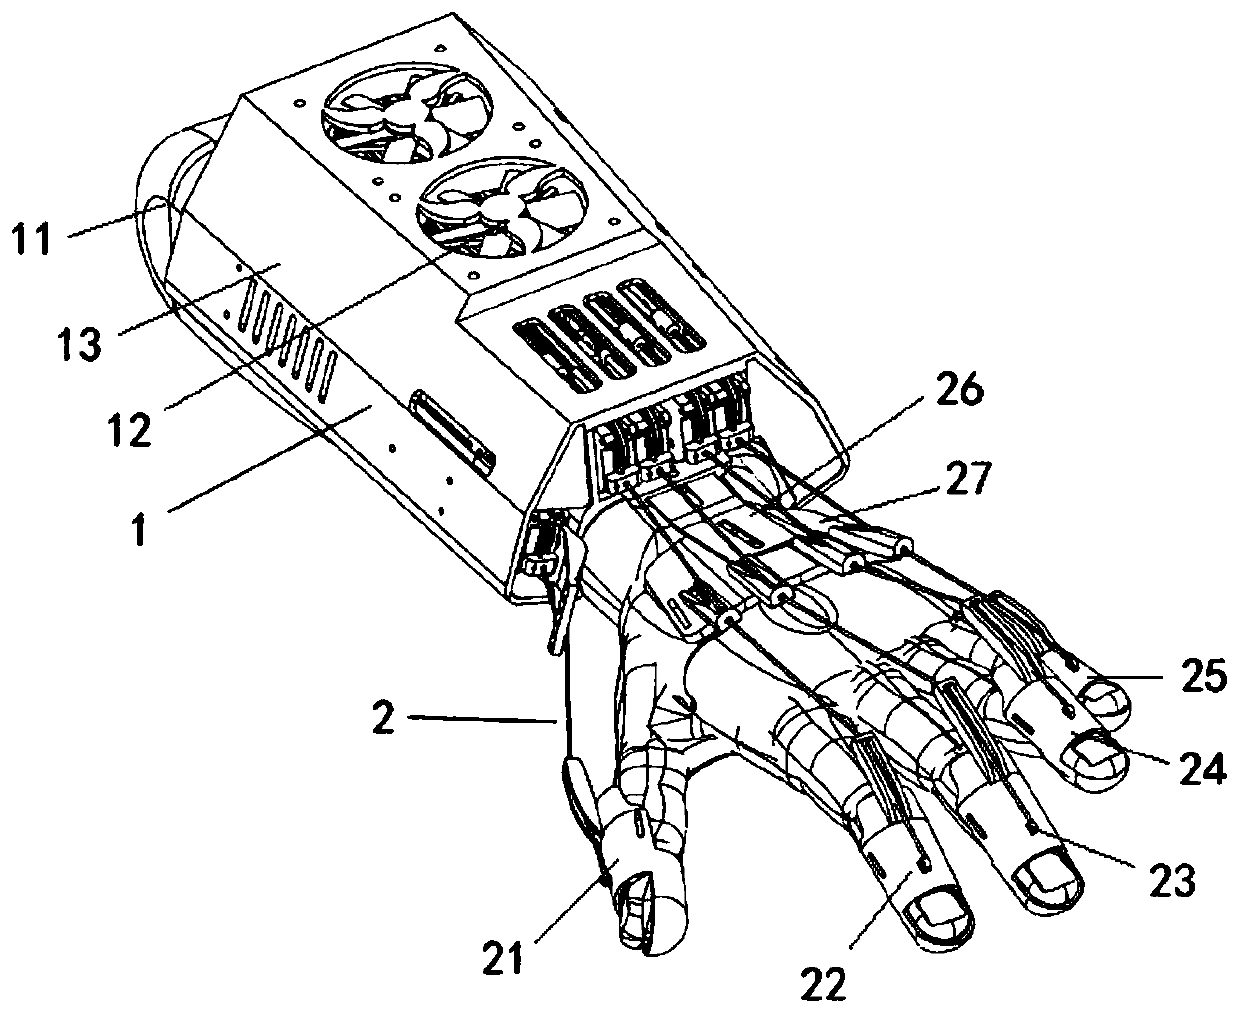 Flexible wearable hand rehabilitation robot driven by memory alloy wire